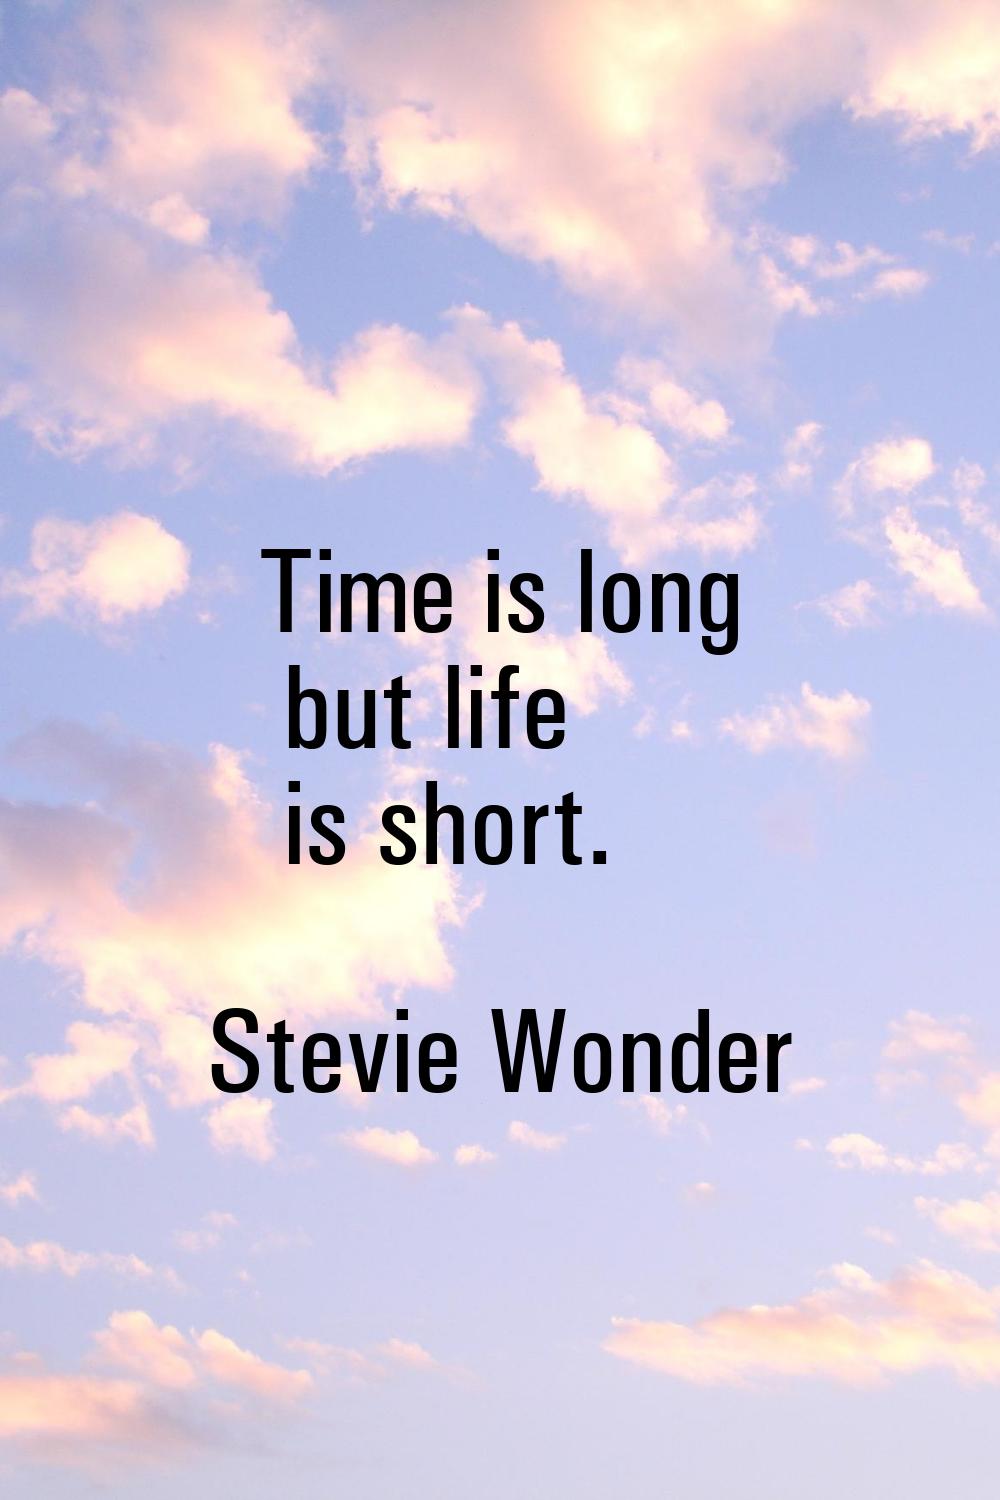 Time is long but life is short.